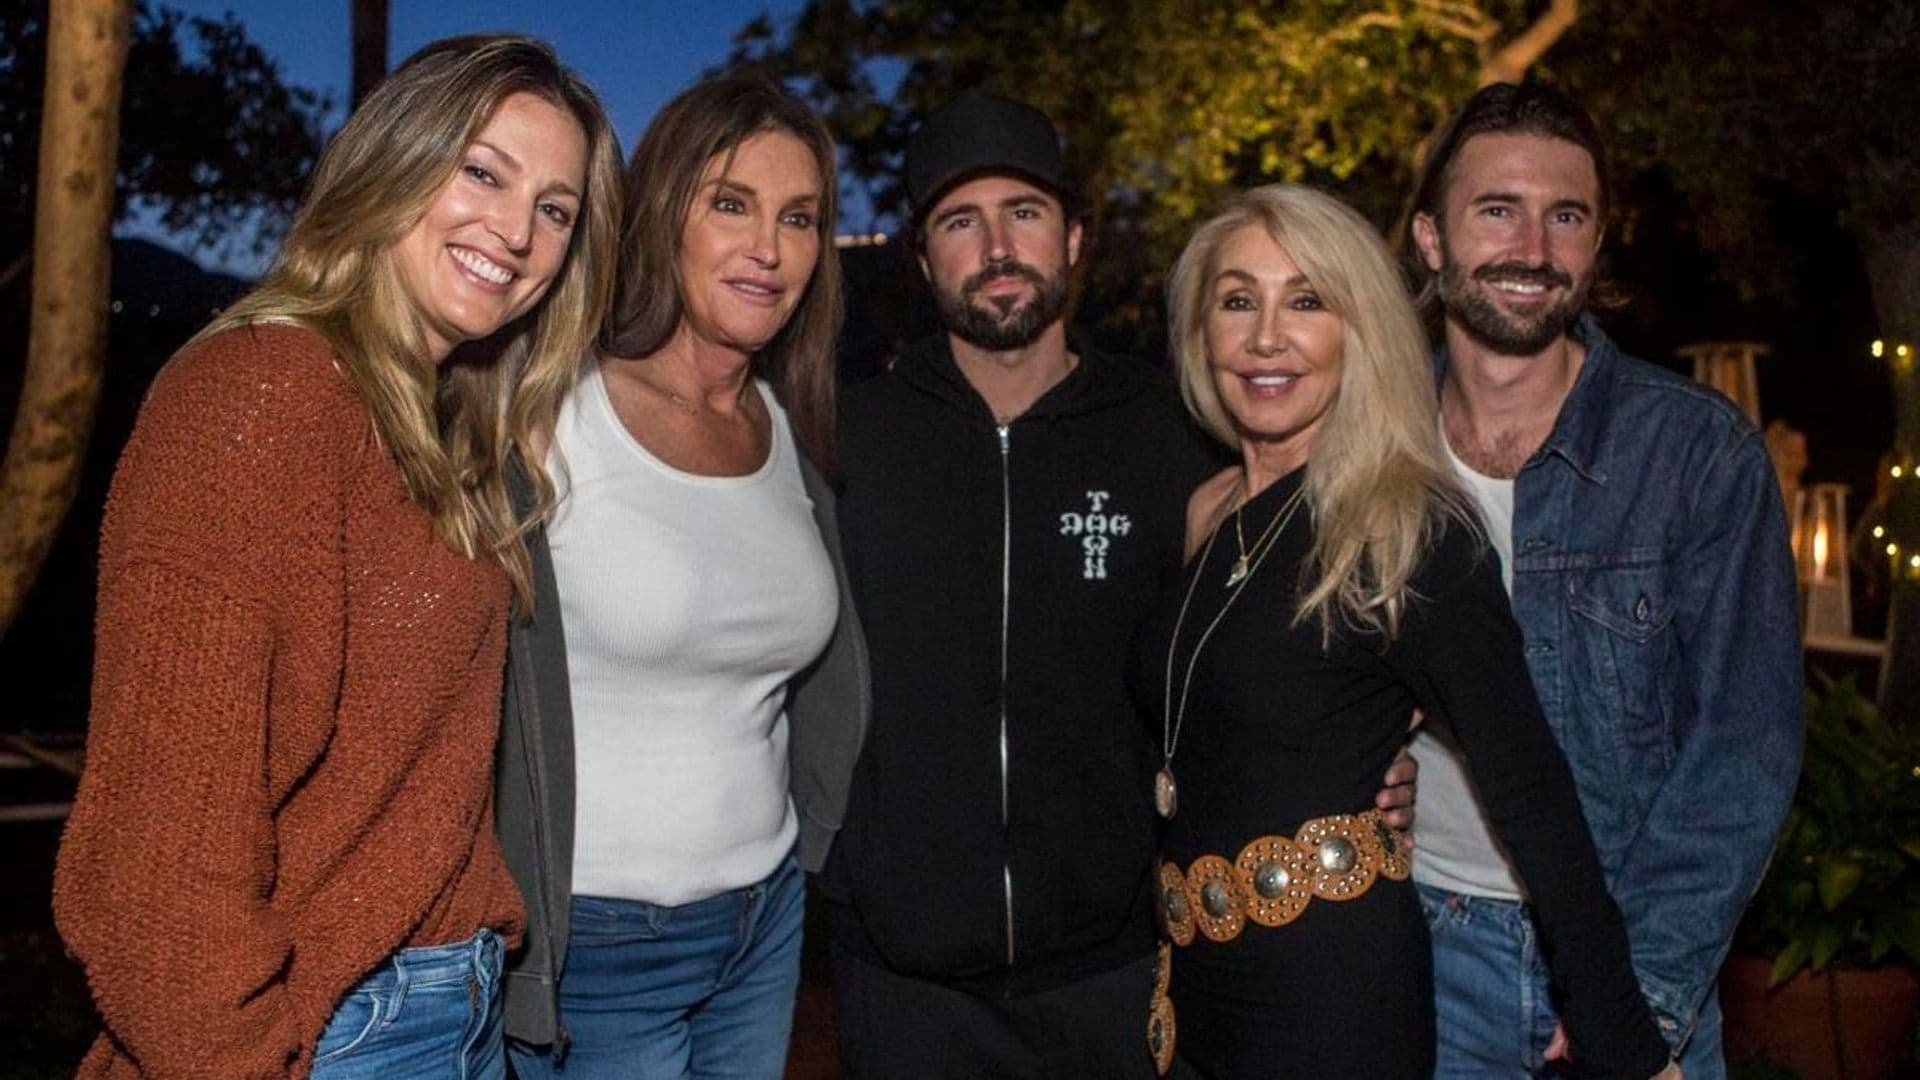 Brandon Jenner Hosts Interactive Party, Live Show And Video Premiere For His New Single "Death Of Me"